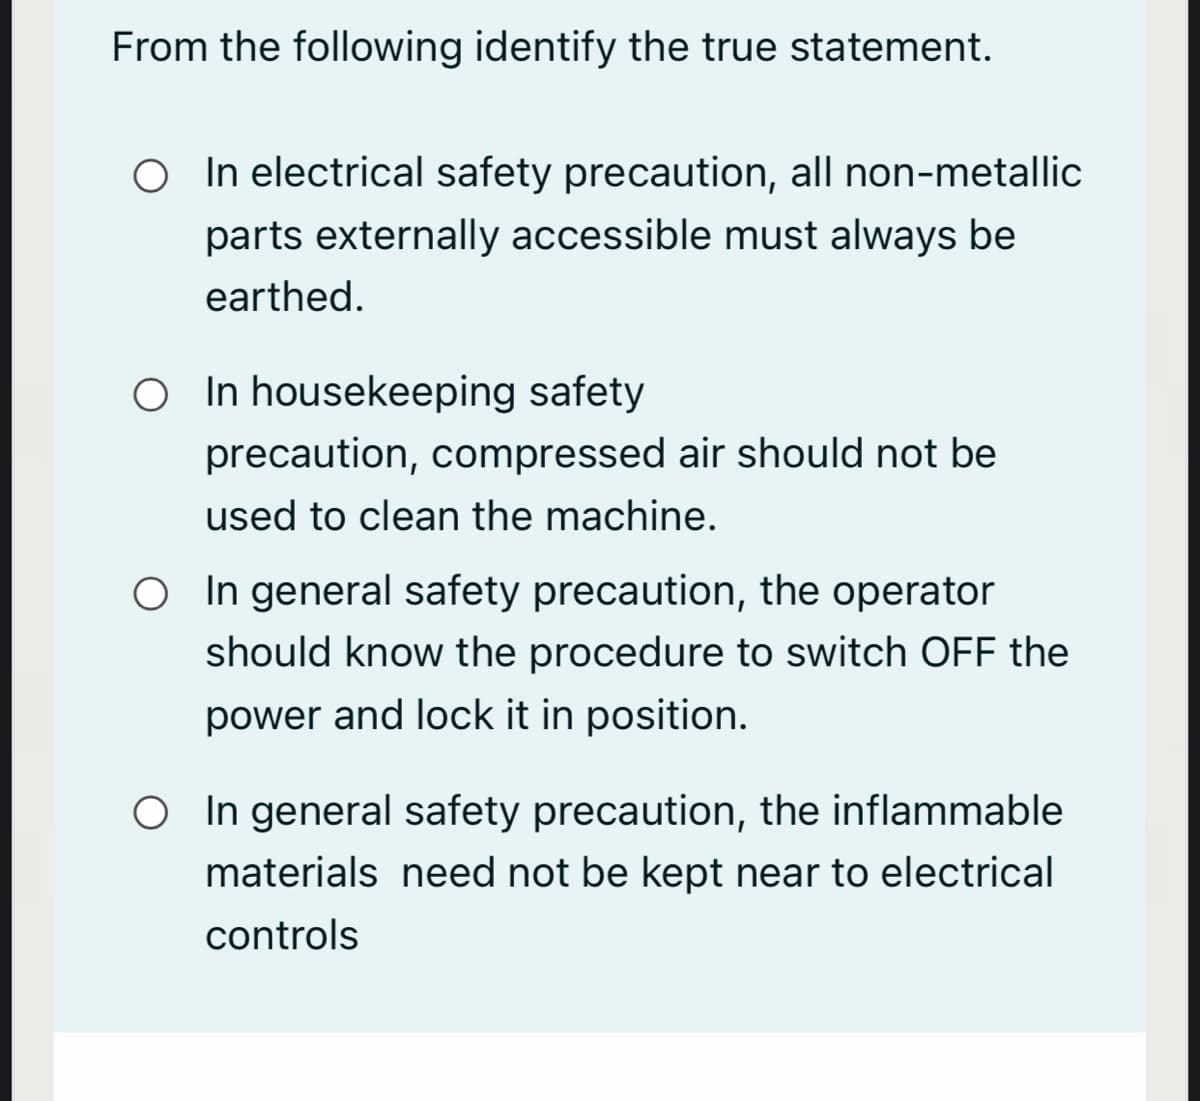 From the following identify the true statement.
O In electrical safety precaution, all non-metallic
parts externally accessible must always be
earthed.
O In housekeeping safety
precaution, compressed air should not be
used to clean the machine.
O In general safety precaution, the operator
should know the procedure to switch OFF the
power and lock it in position.
O In general safety precaution, the inflammable
materials need not be kept near to electrical
controls
